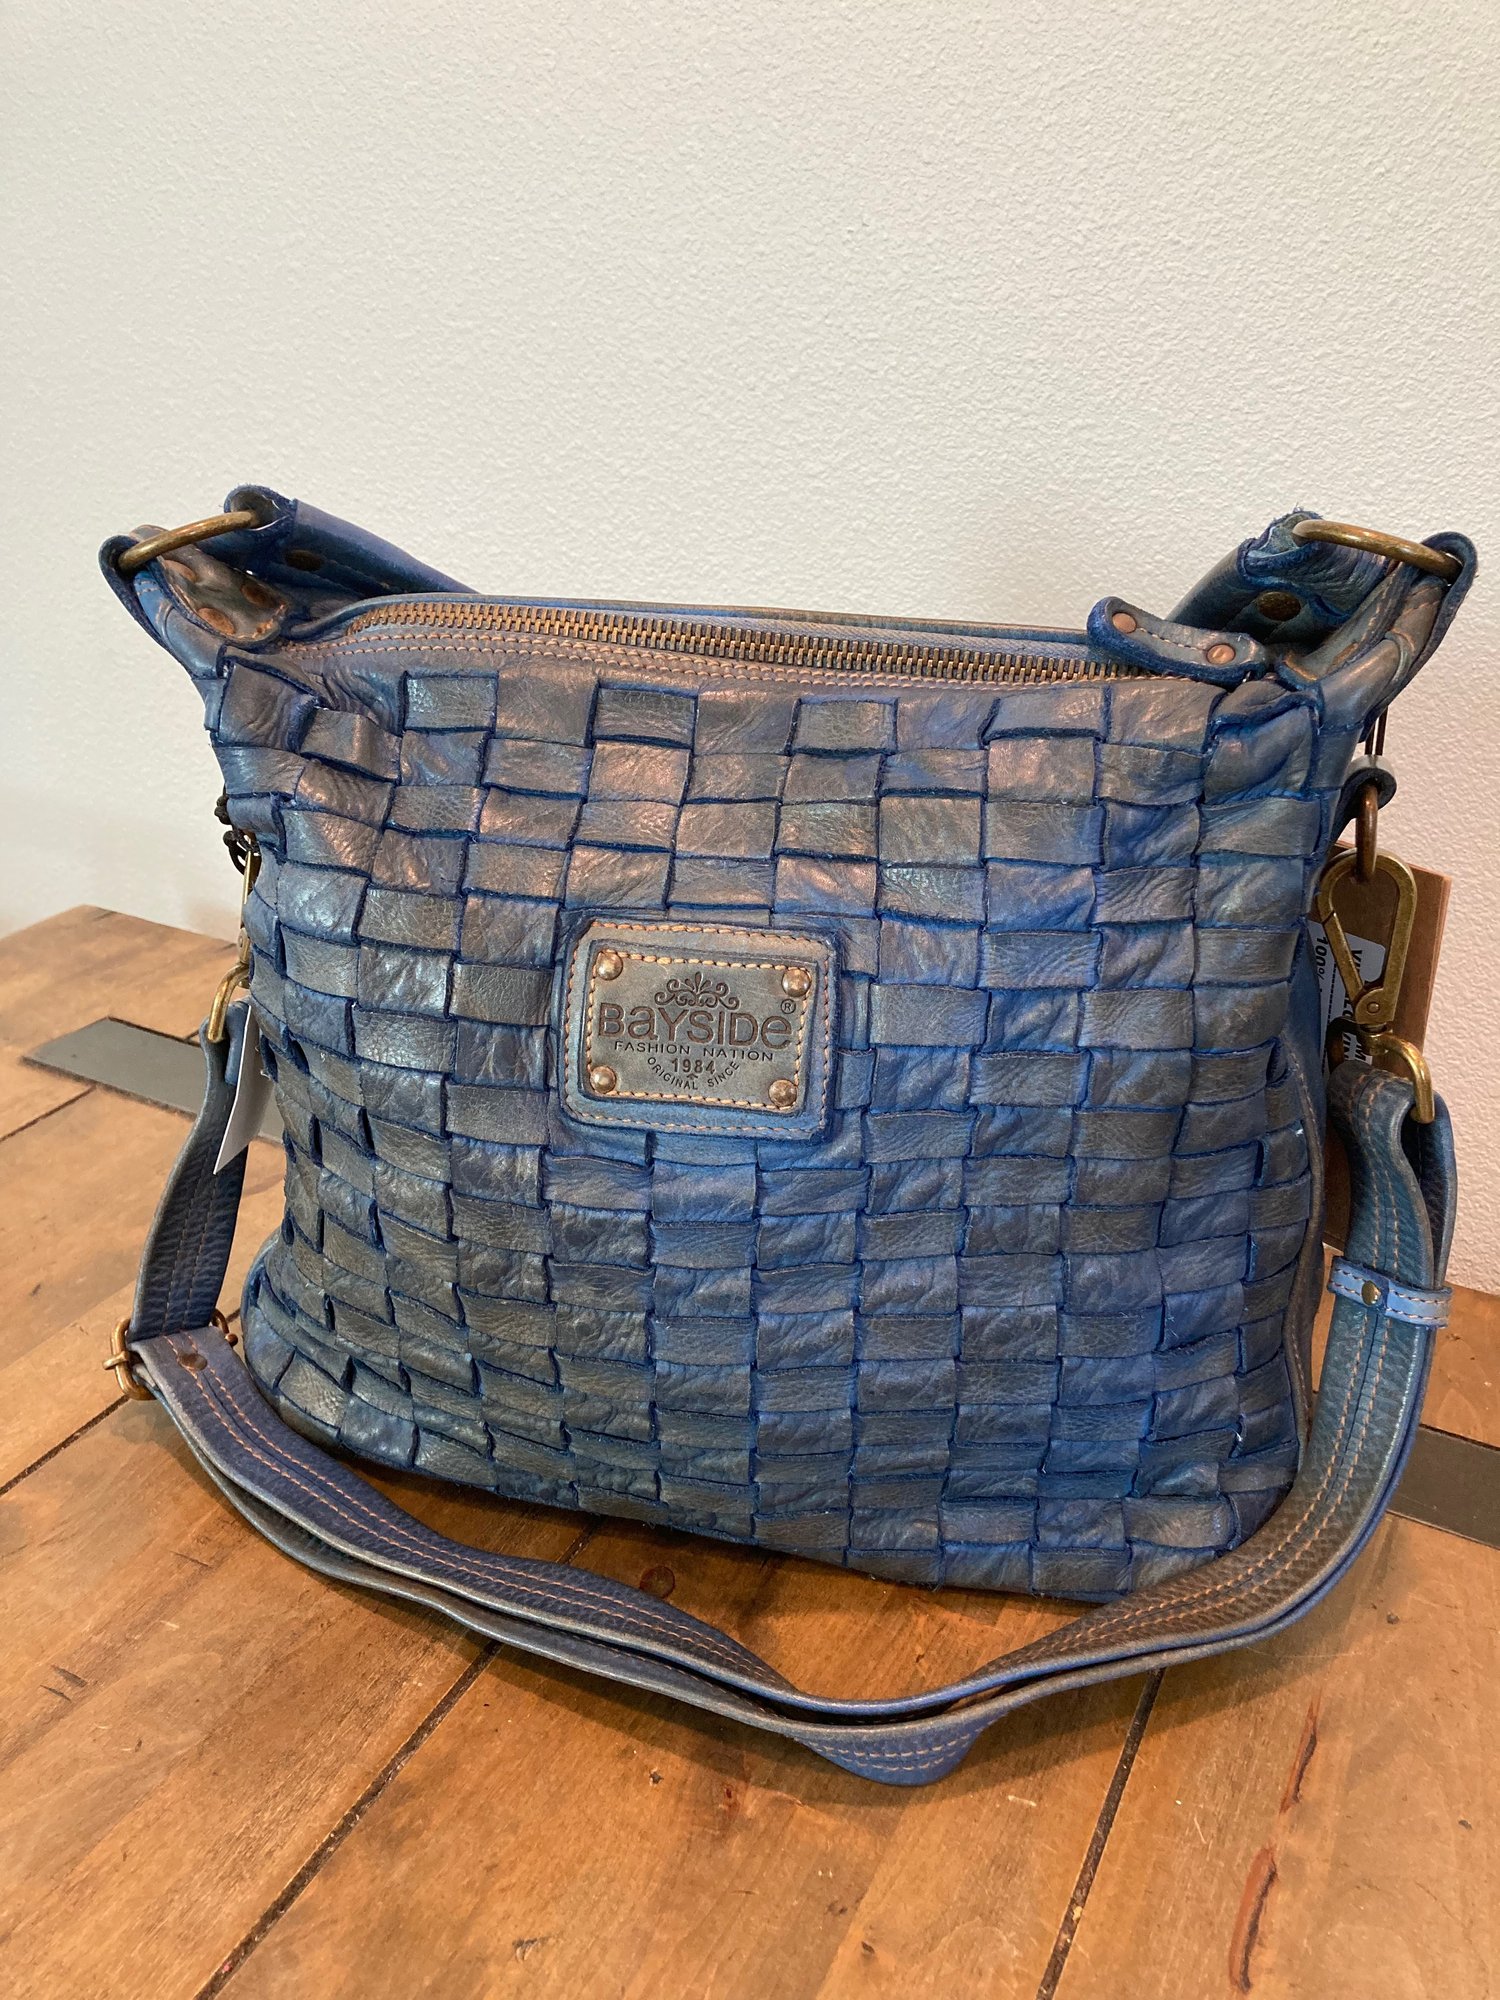 Elisabetta Bayside Distressed Woven Leather Bag in Blue — Live.Love.Handbags